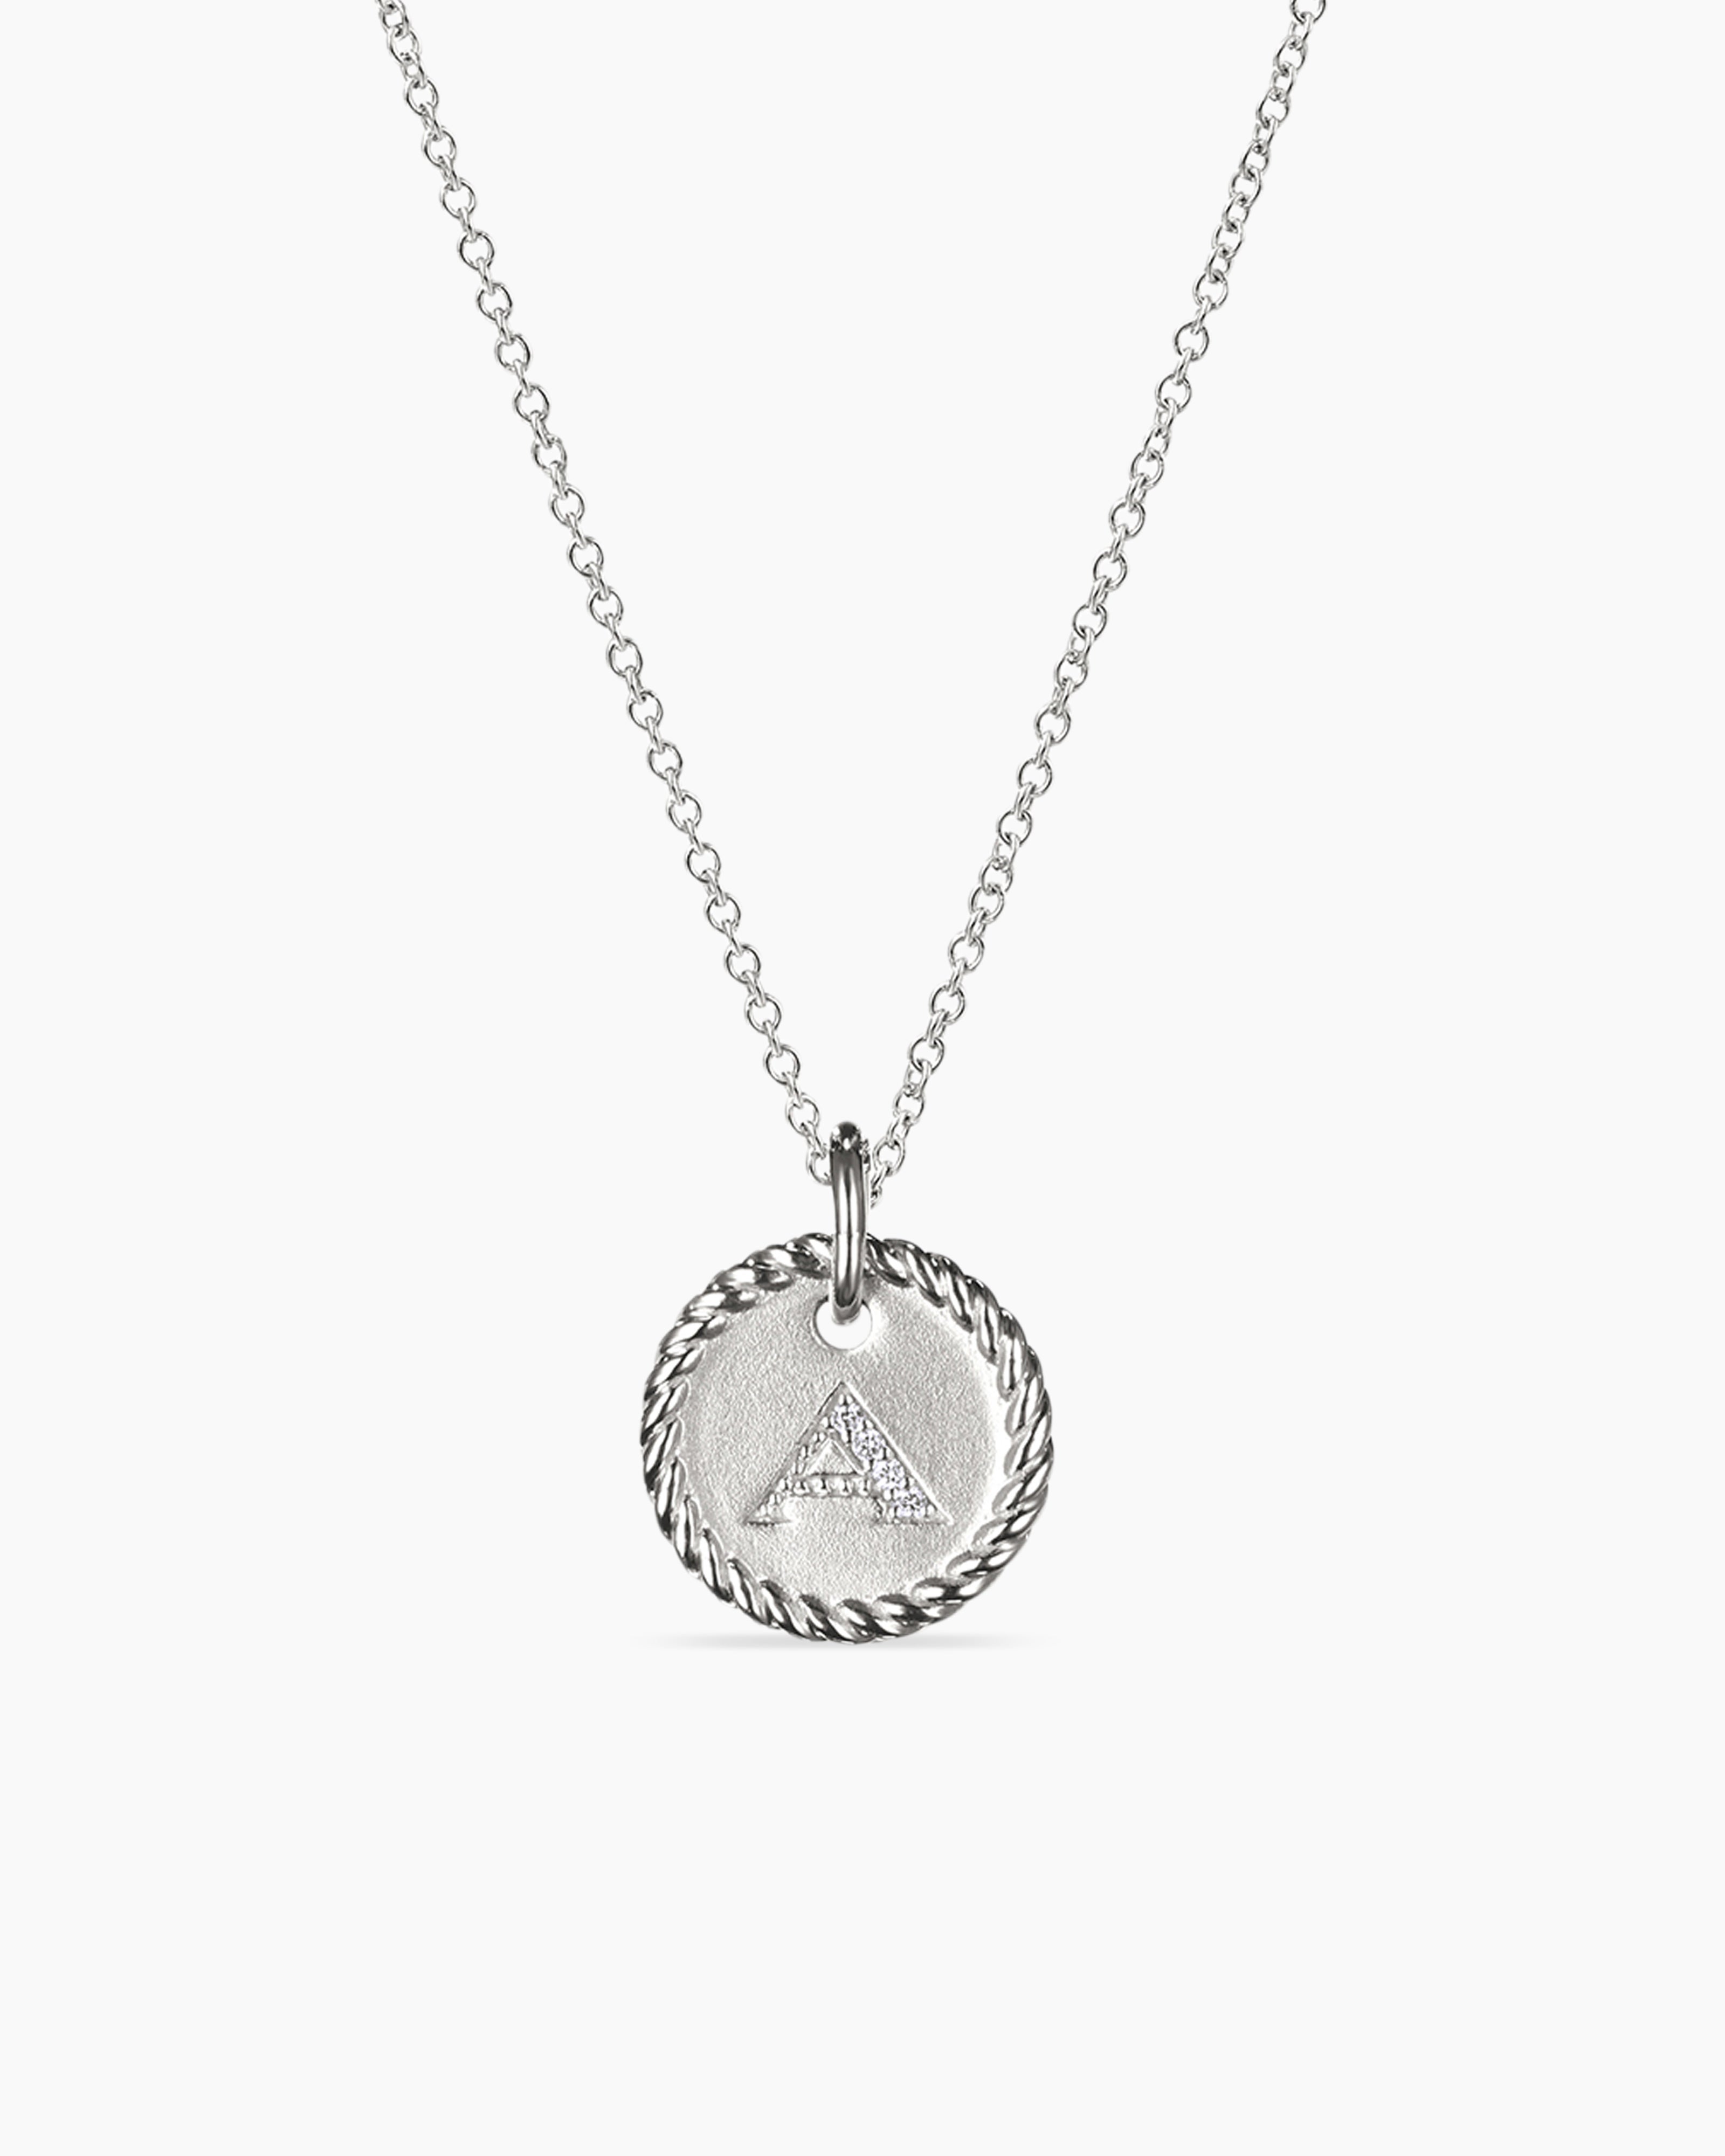 David Yurman Initial Charm Necklace in 18K White Gold with Diamond A Women's Size 18 in